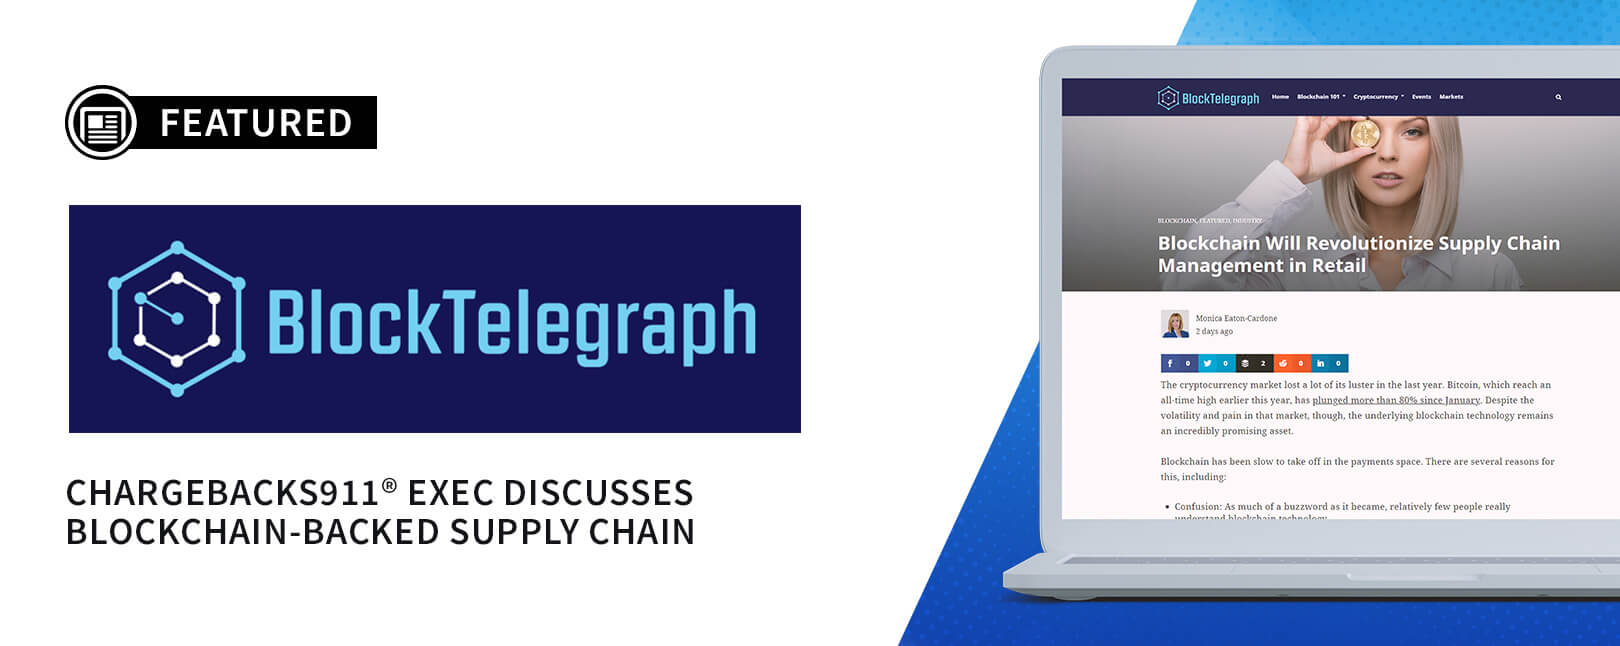 Chargebacks911® Exec Discusses Blockchain-Backed Supply Chain for BlockTelegraph